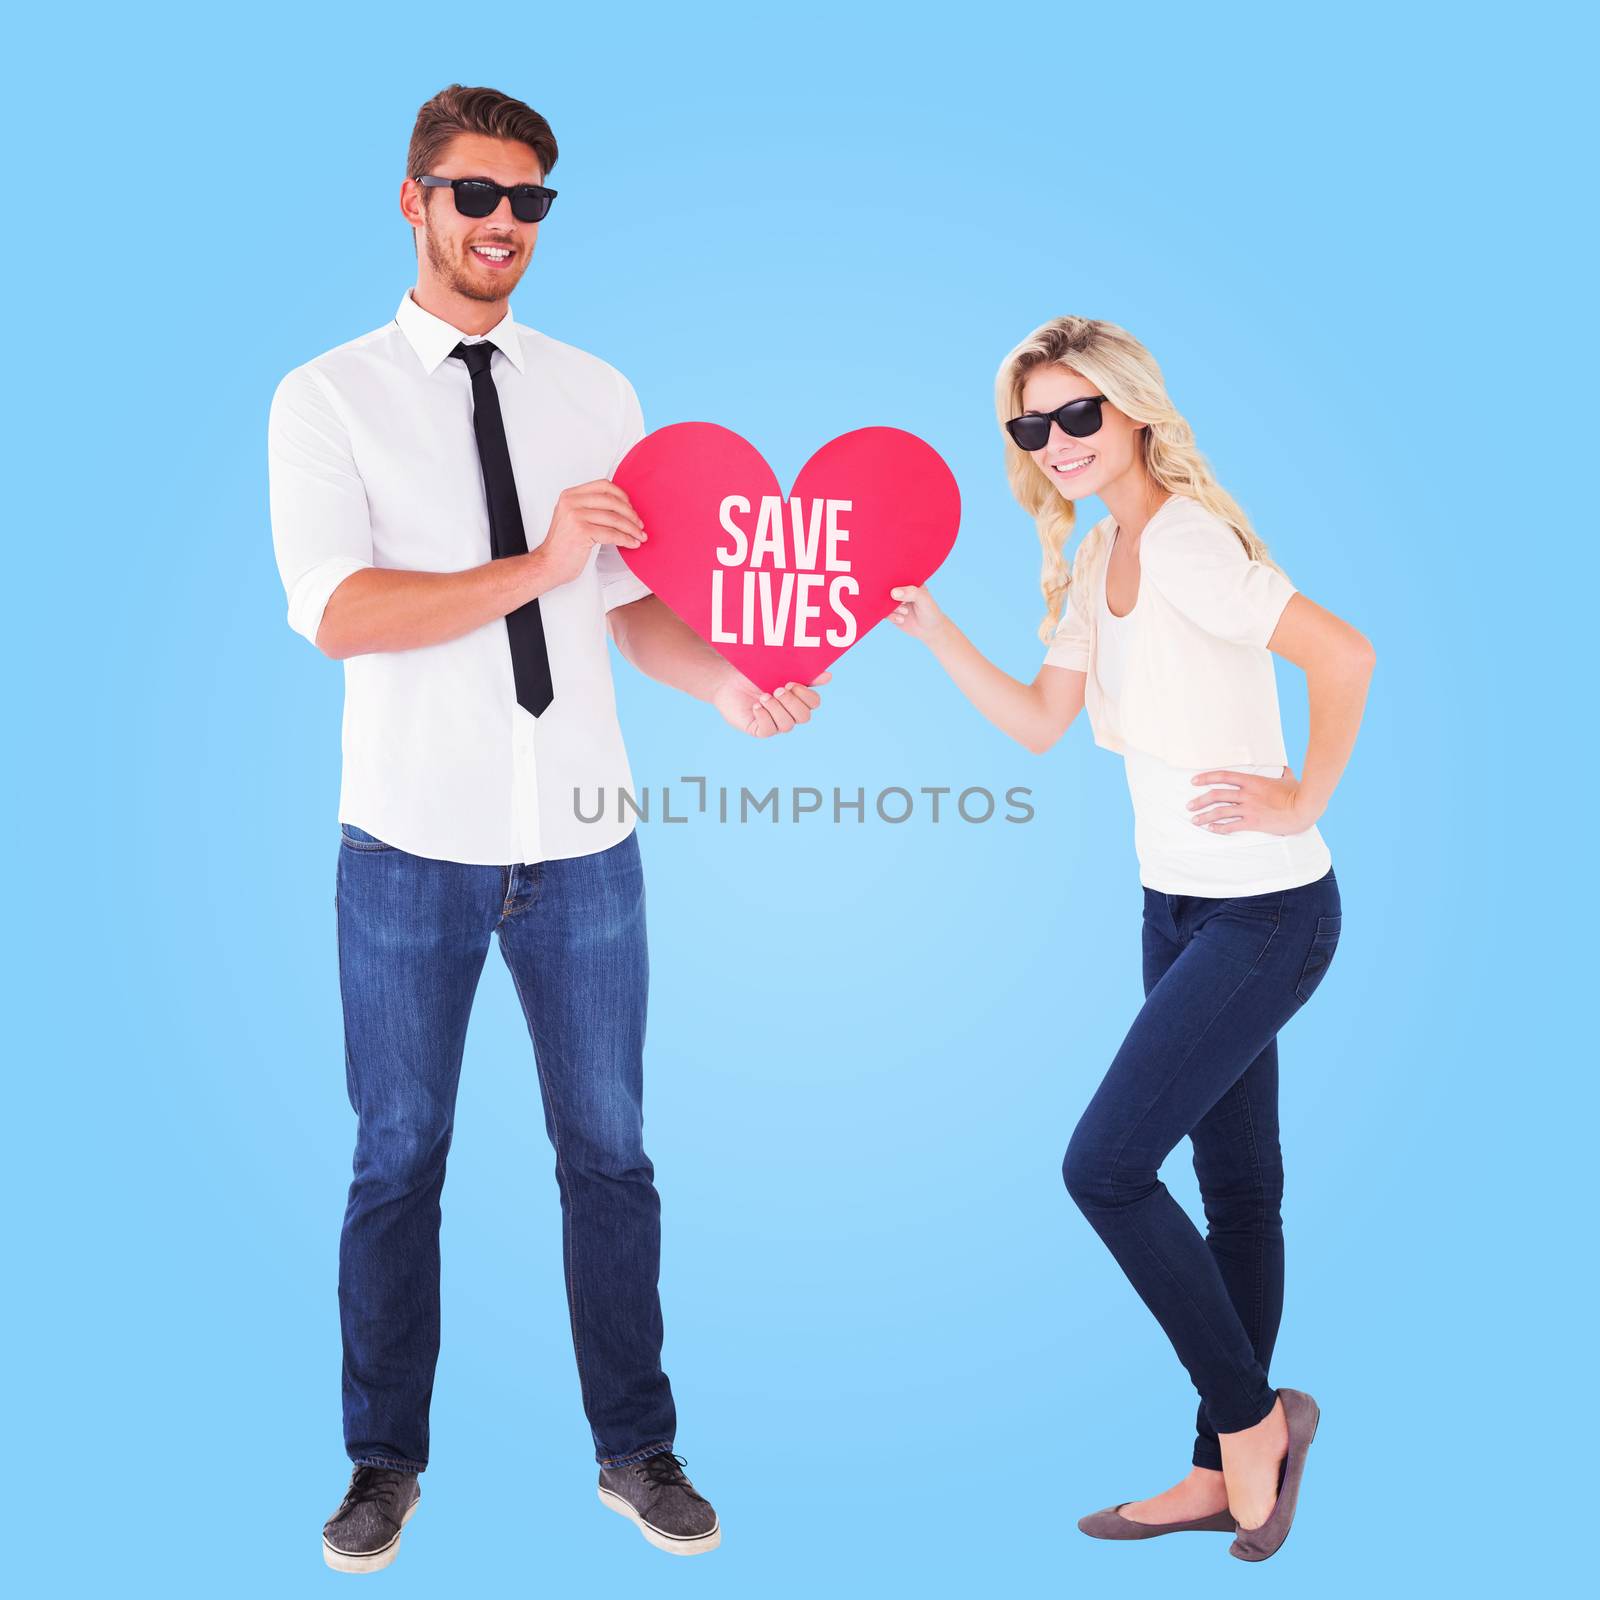 Composite image of cool young couple holding red heart by Wavebreakmedia